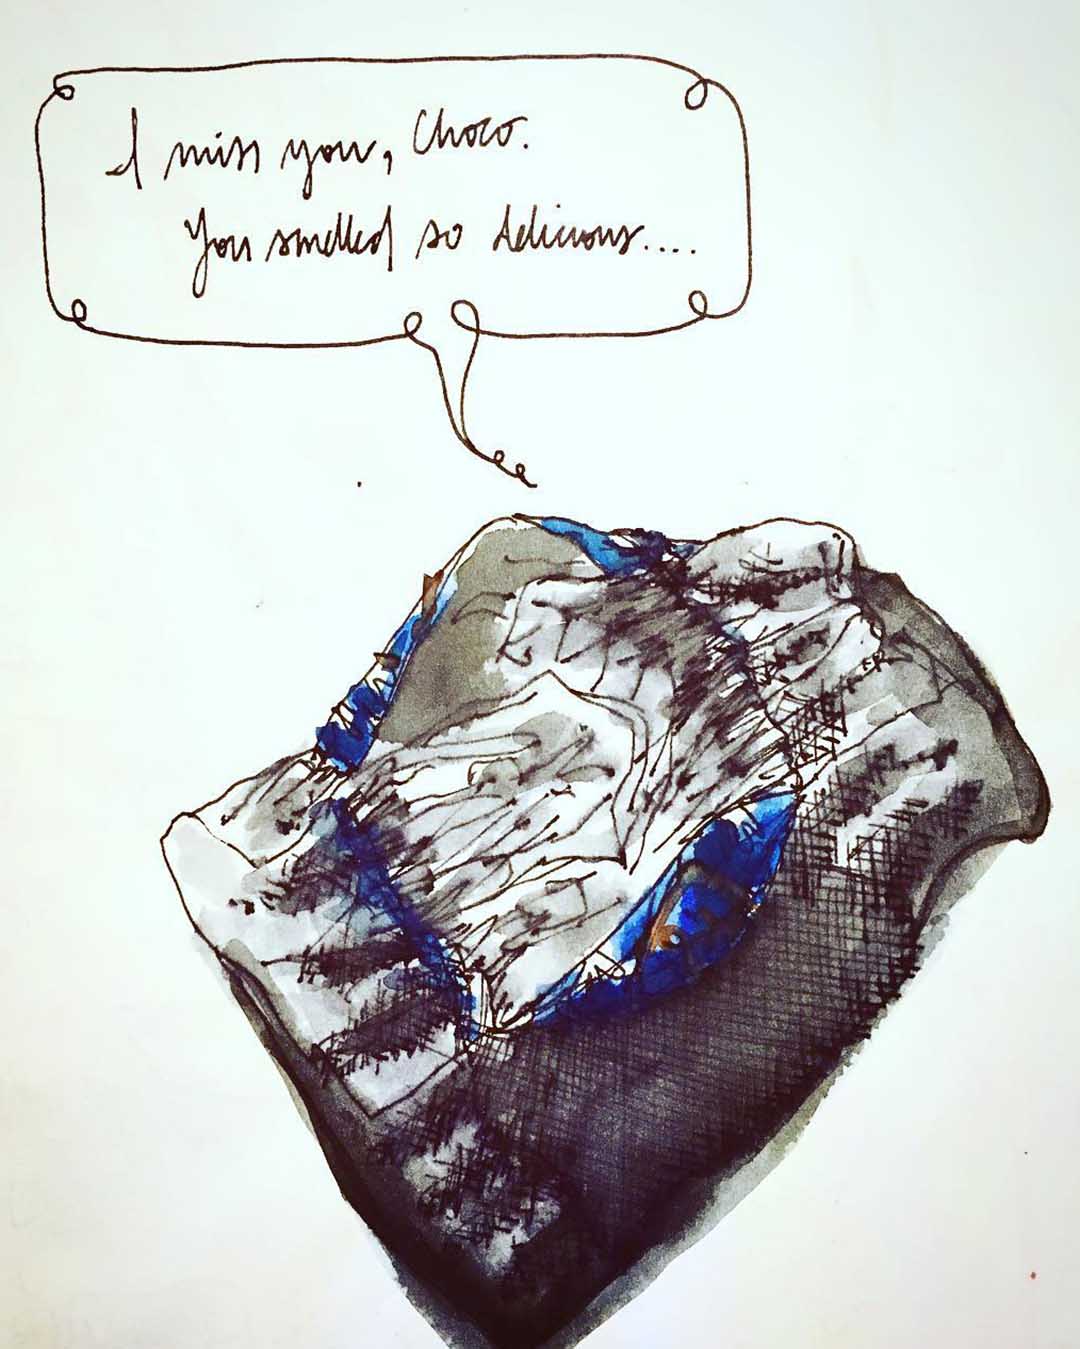 A pen and ink sketch of an empty and depressed chocolate wrapper, lamenting (via curlicued speech bubble), “I miss you choco. You smelled so delicious.”